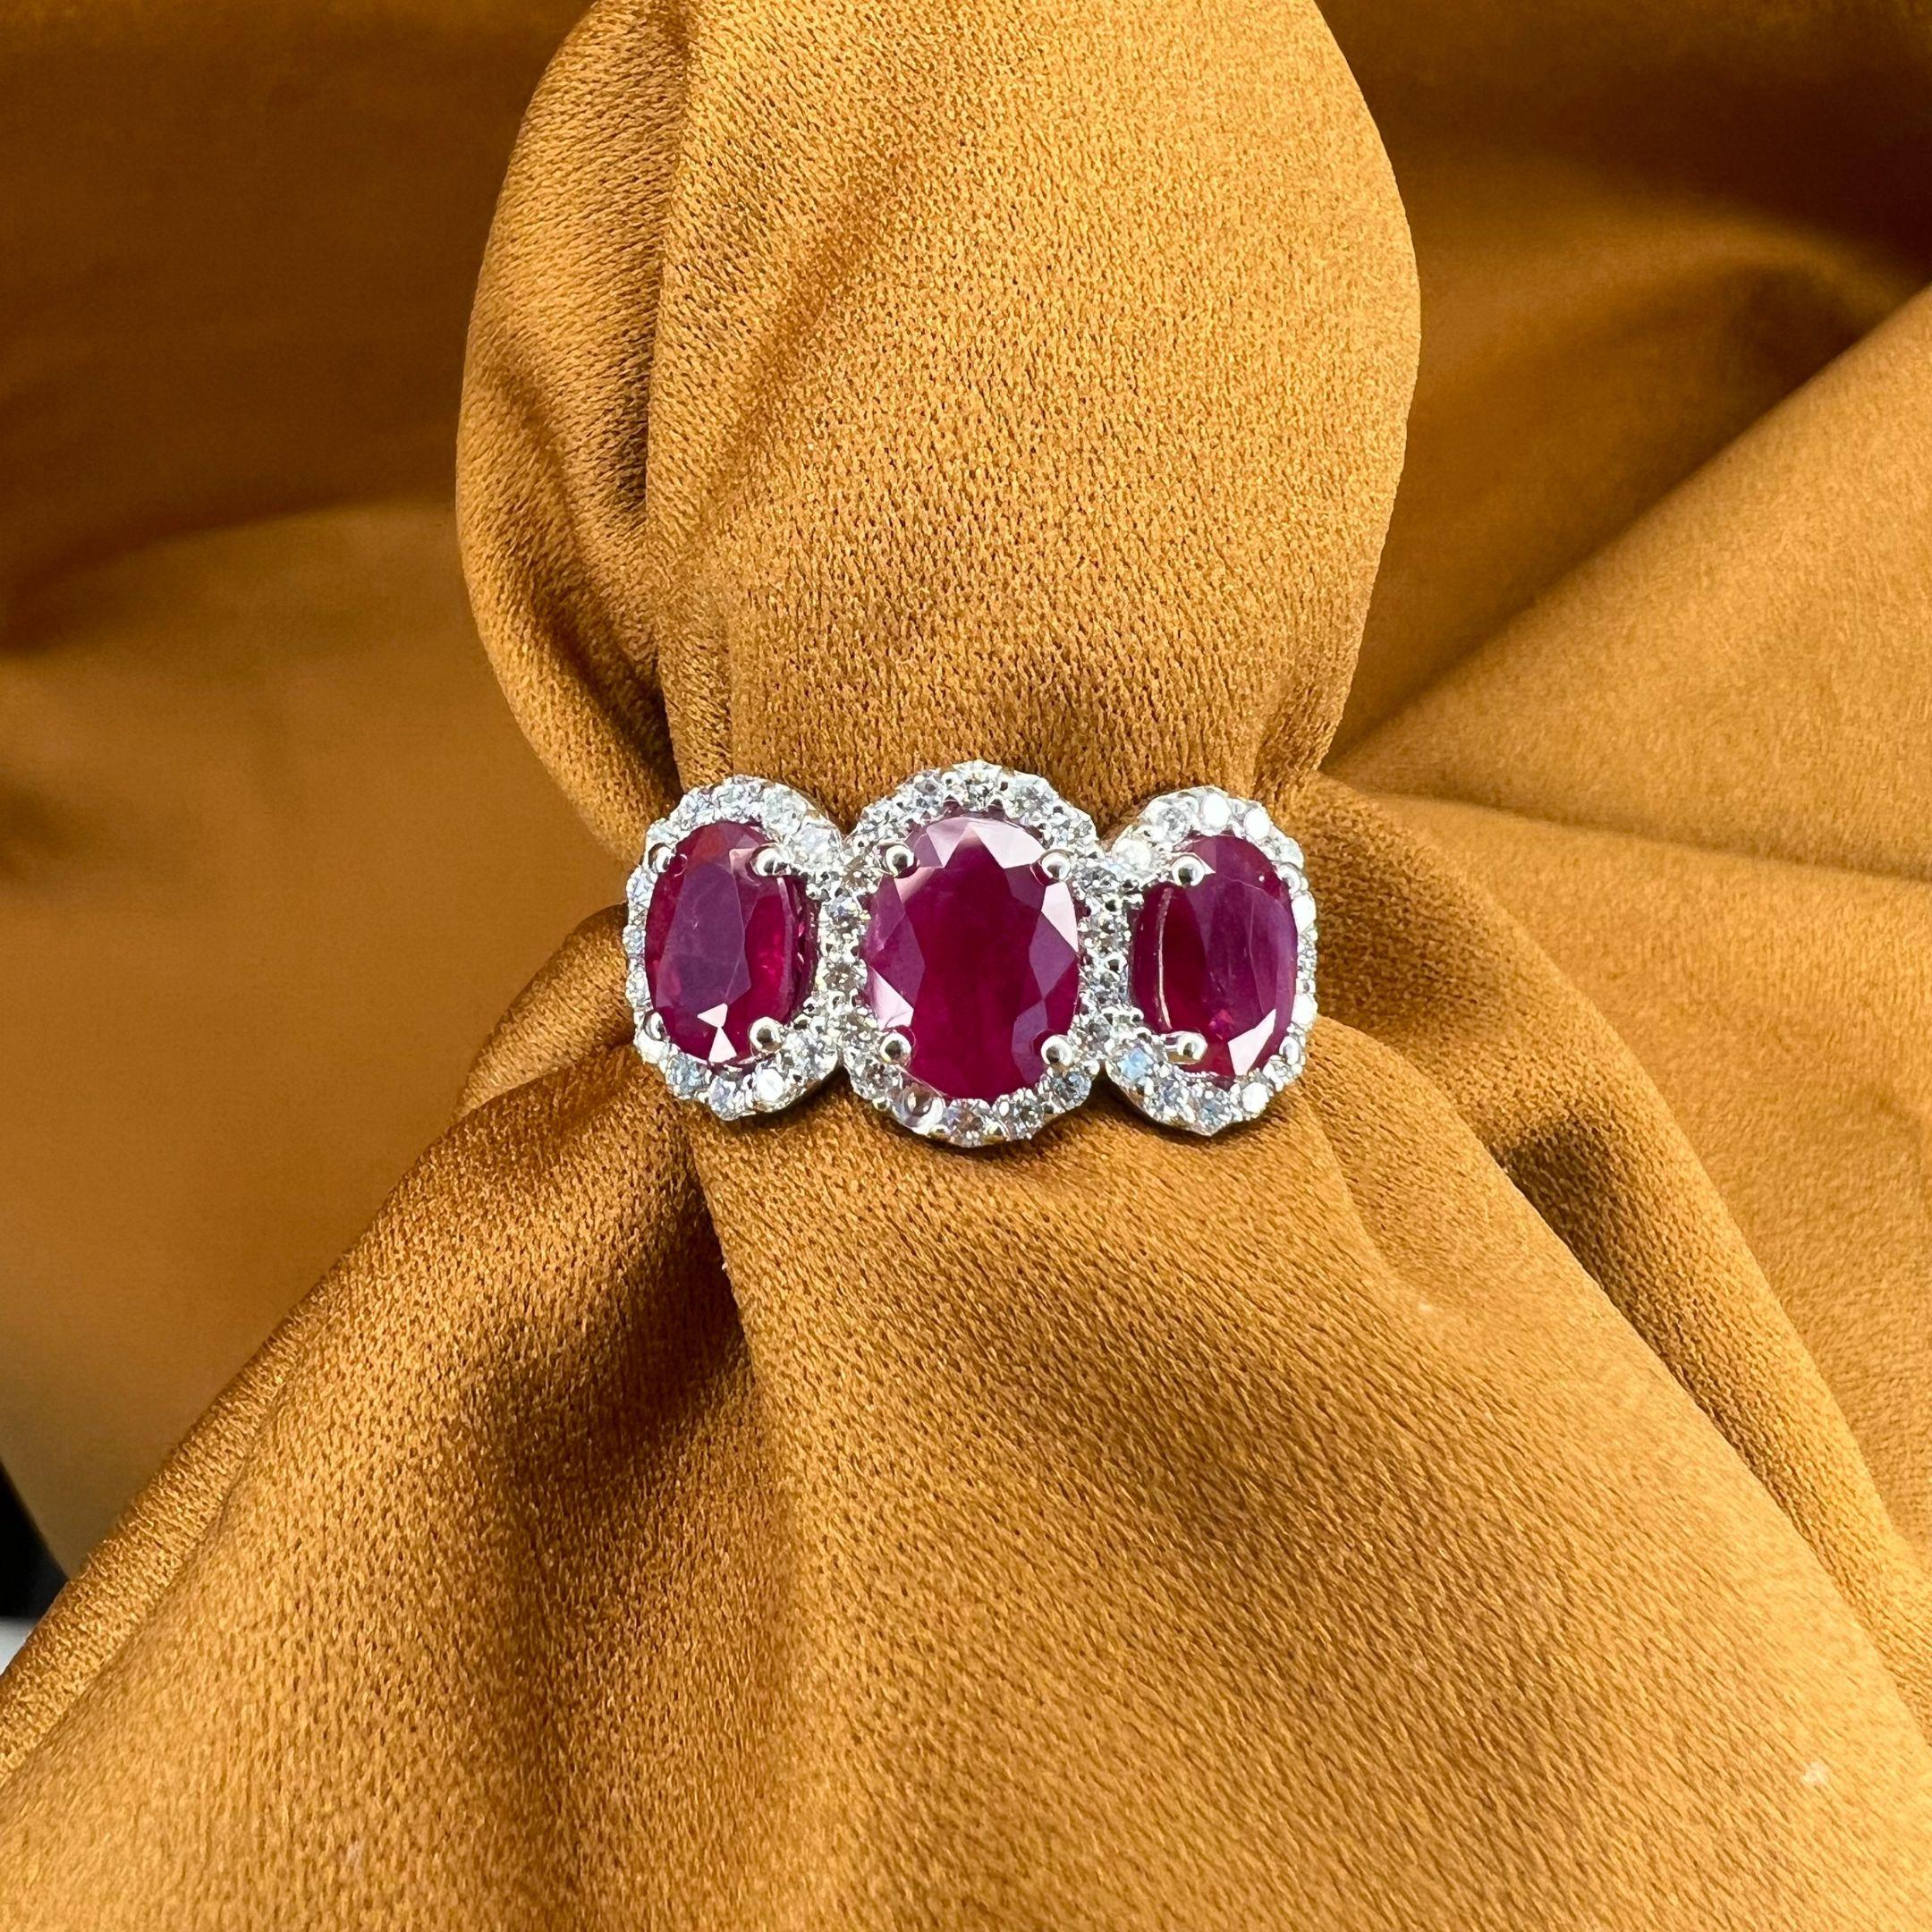 Ruby Weight: 3.30 CTs
Measurements: 8x6/7x5 mm
Diamond Weight: 0.48 CTs
Metal: 18K White Gold 
Gold Weight: 5.46 gm
Ring Size: 7
Shape: Oval
Color: Red
Hardness: 9
Birthstone: July
Product ID: MUR25317/Line 8